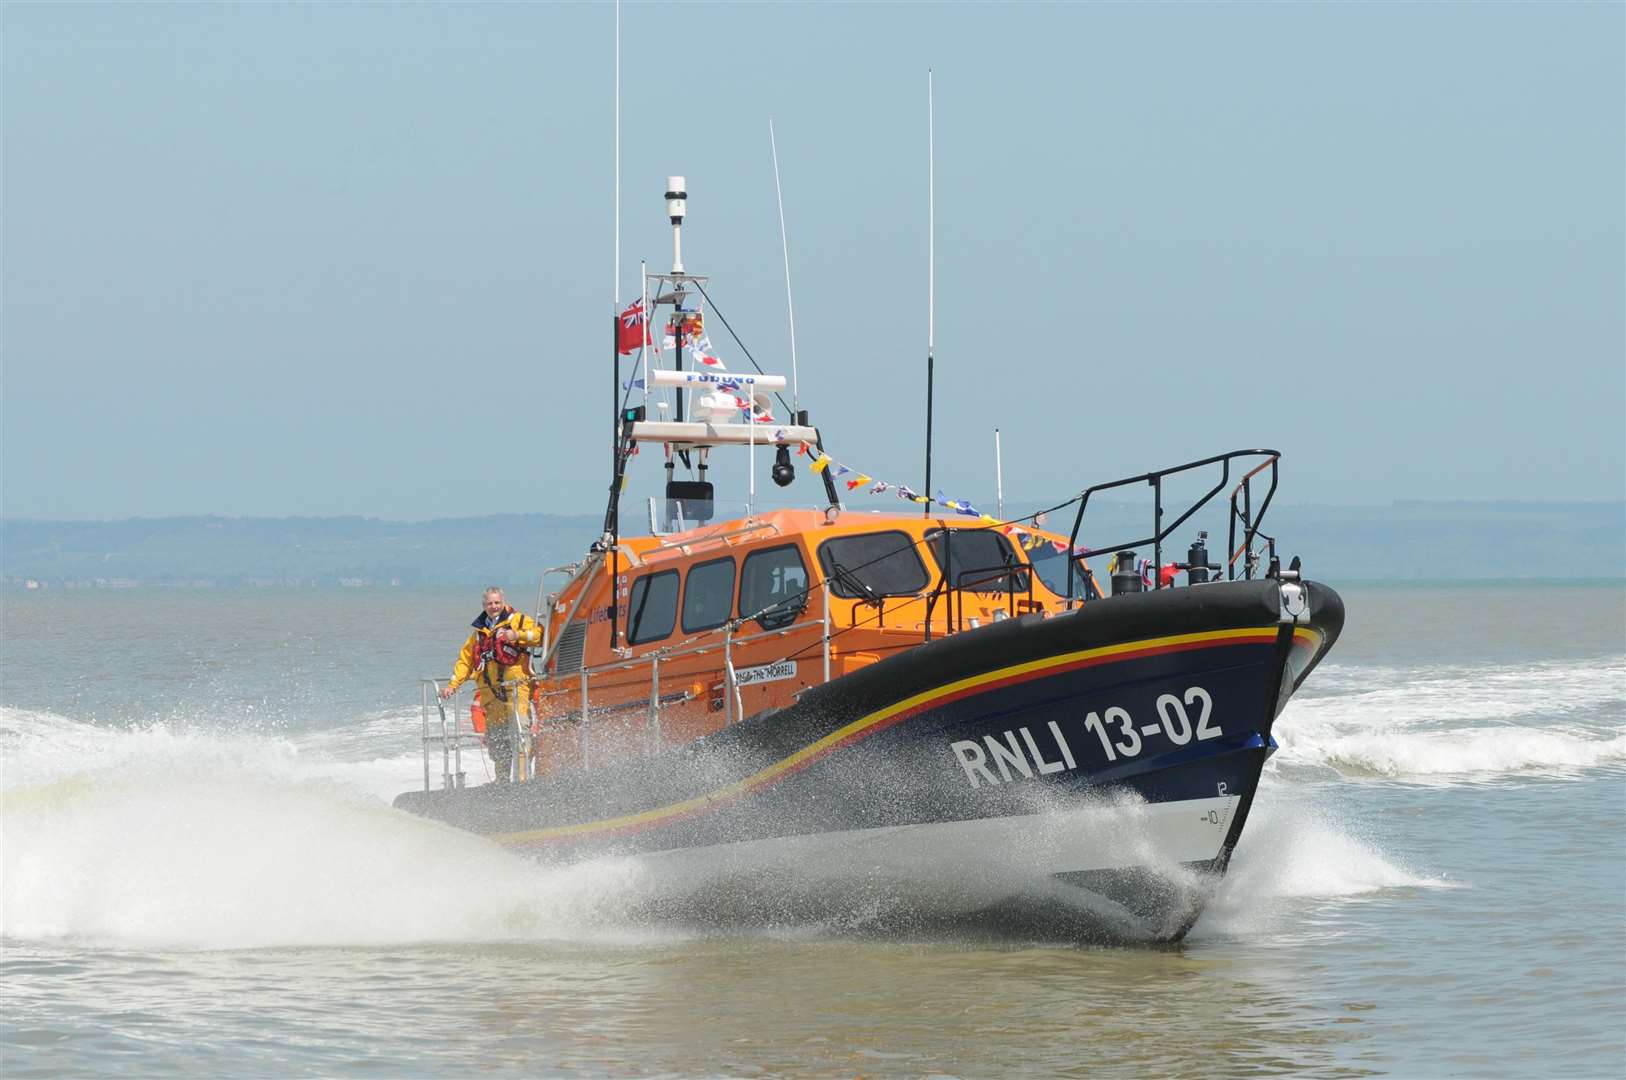 The Dungeness lifeboat The Morrell was used in the search. Library picture: Wayne McCabe for the KMG